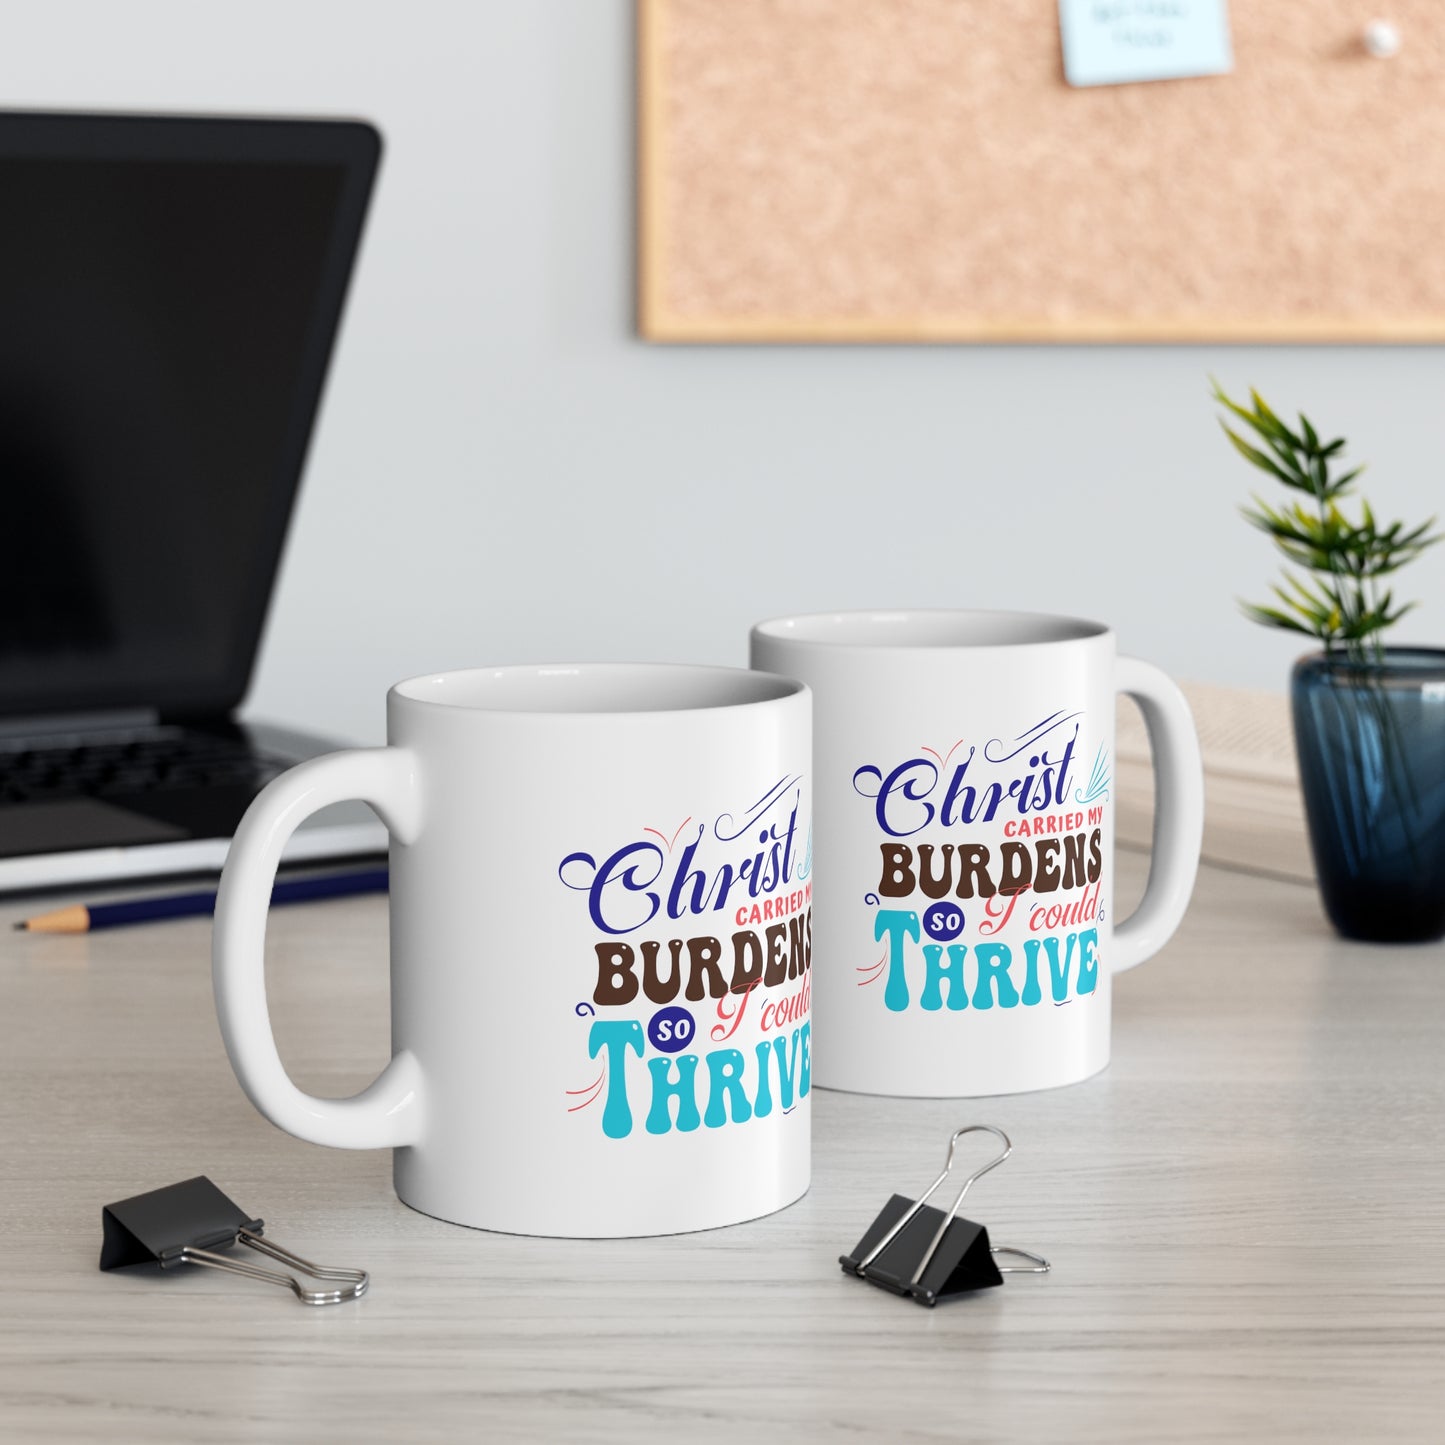 Christ Carried My Burdens So I Could Thrive White Ceramic Mug 11oz (double sided printing) Printify